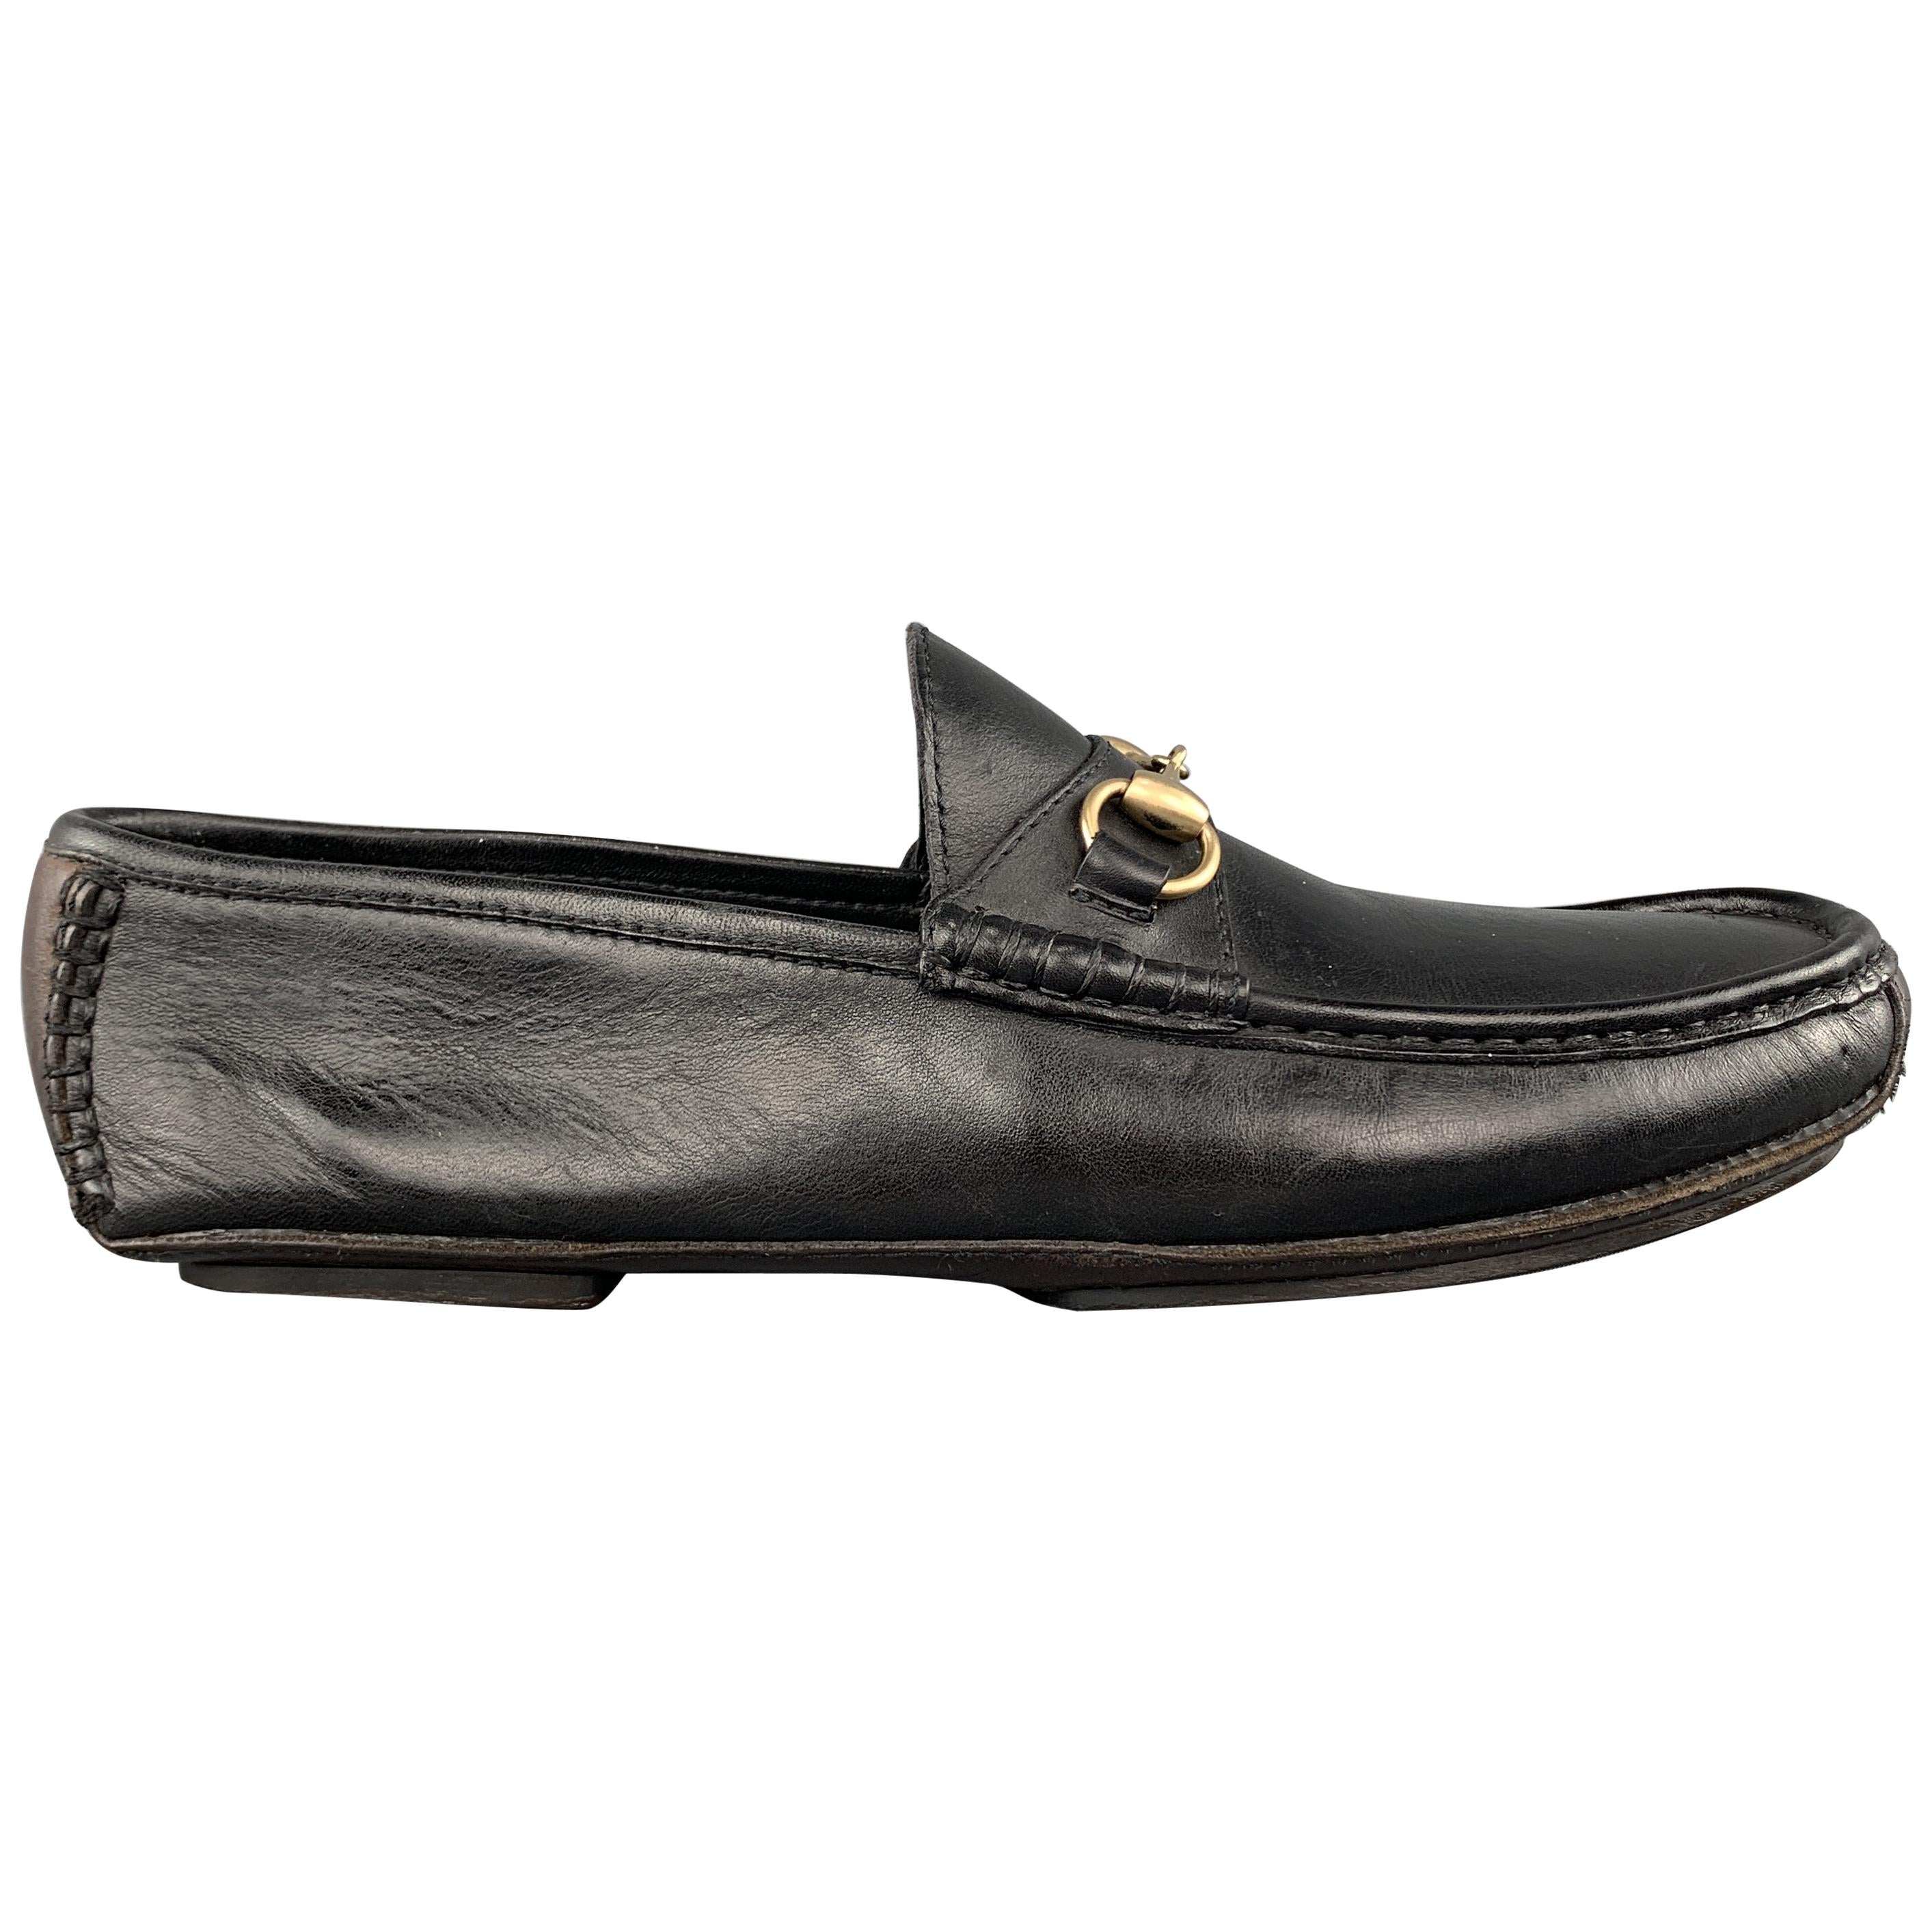 GUCCI Size 10 Black Leather Gold Tone Horsebit Driver Sole Loafers